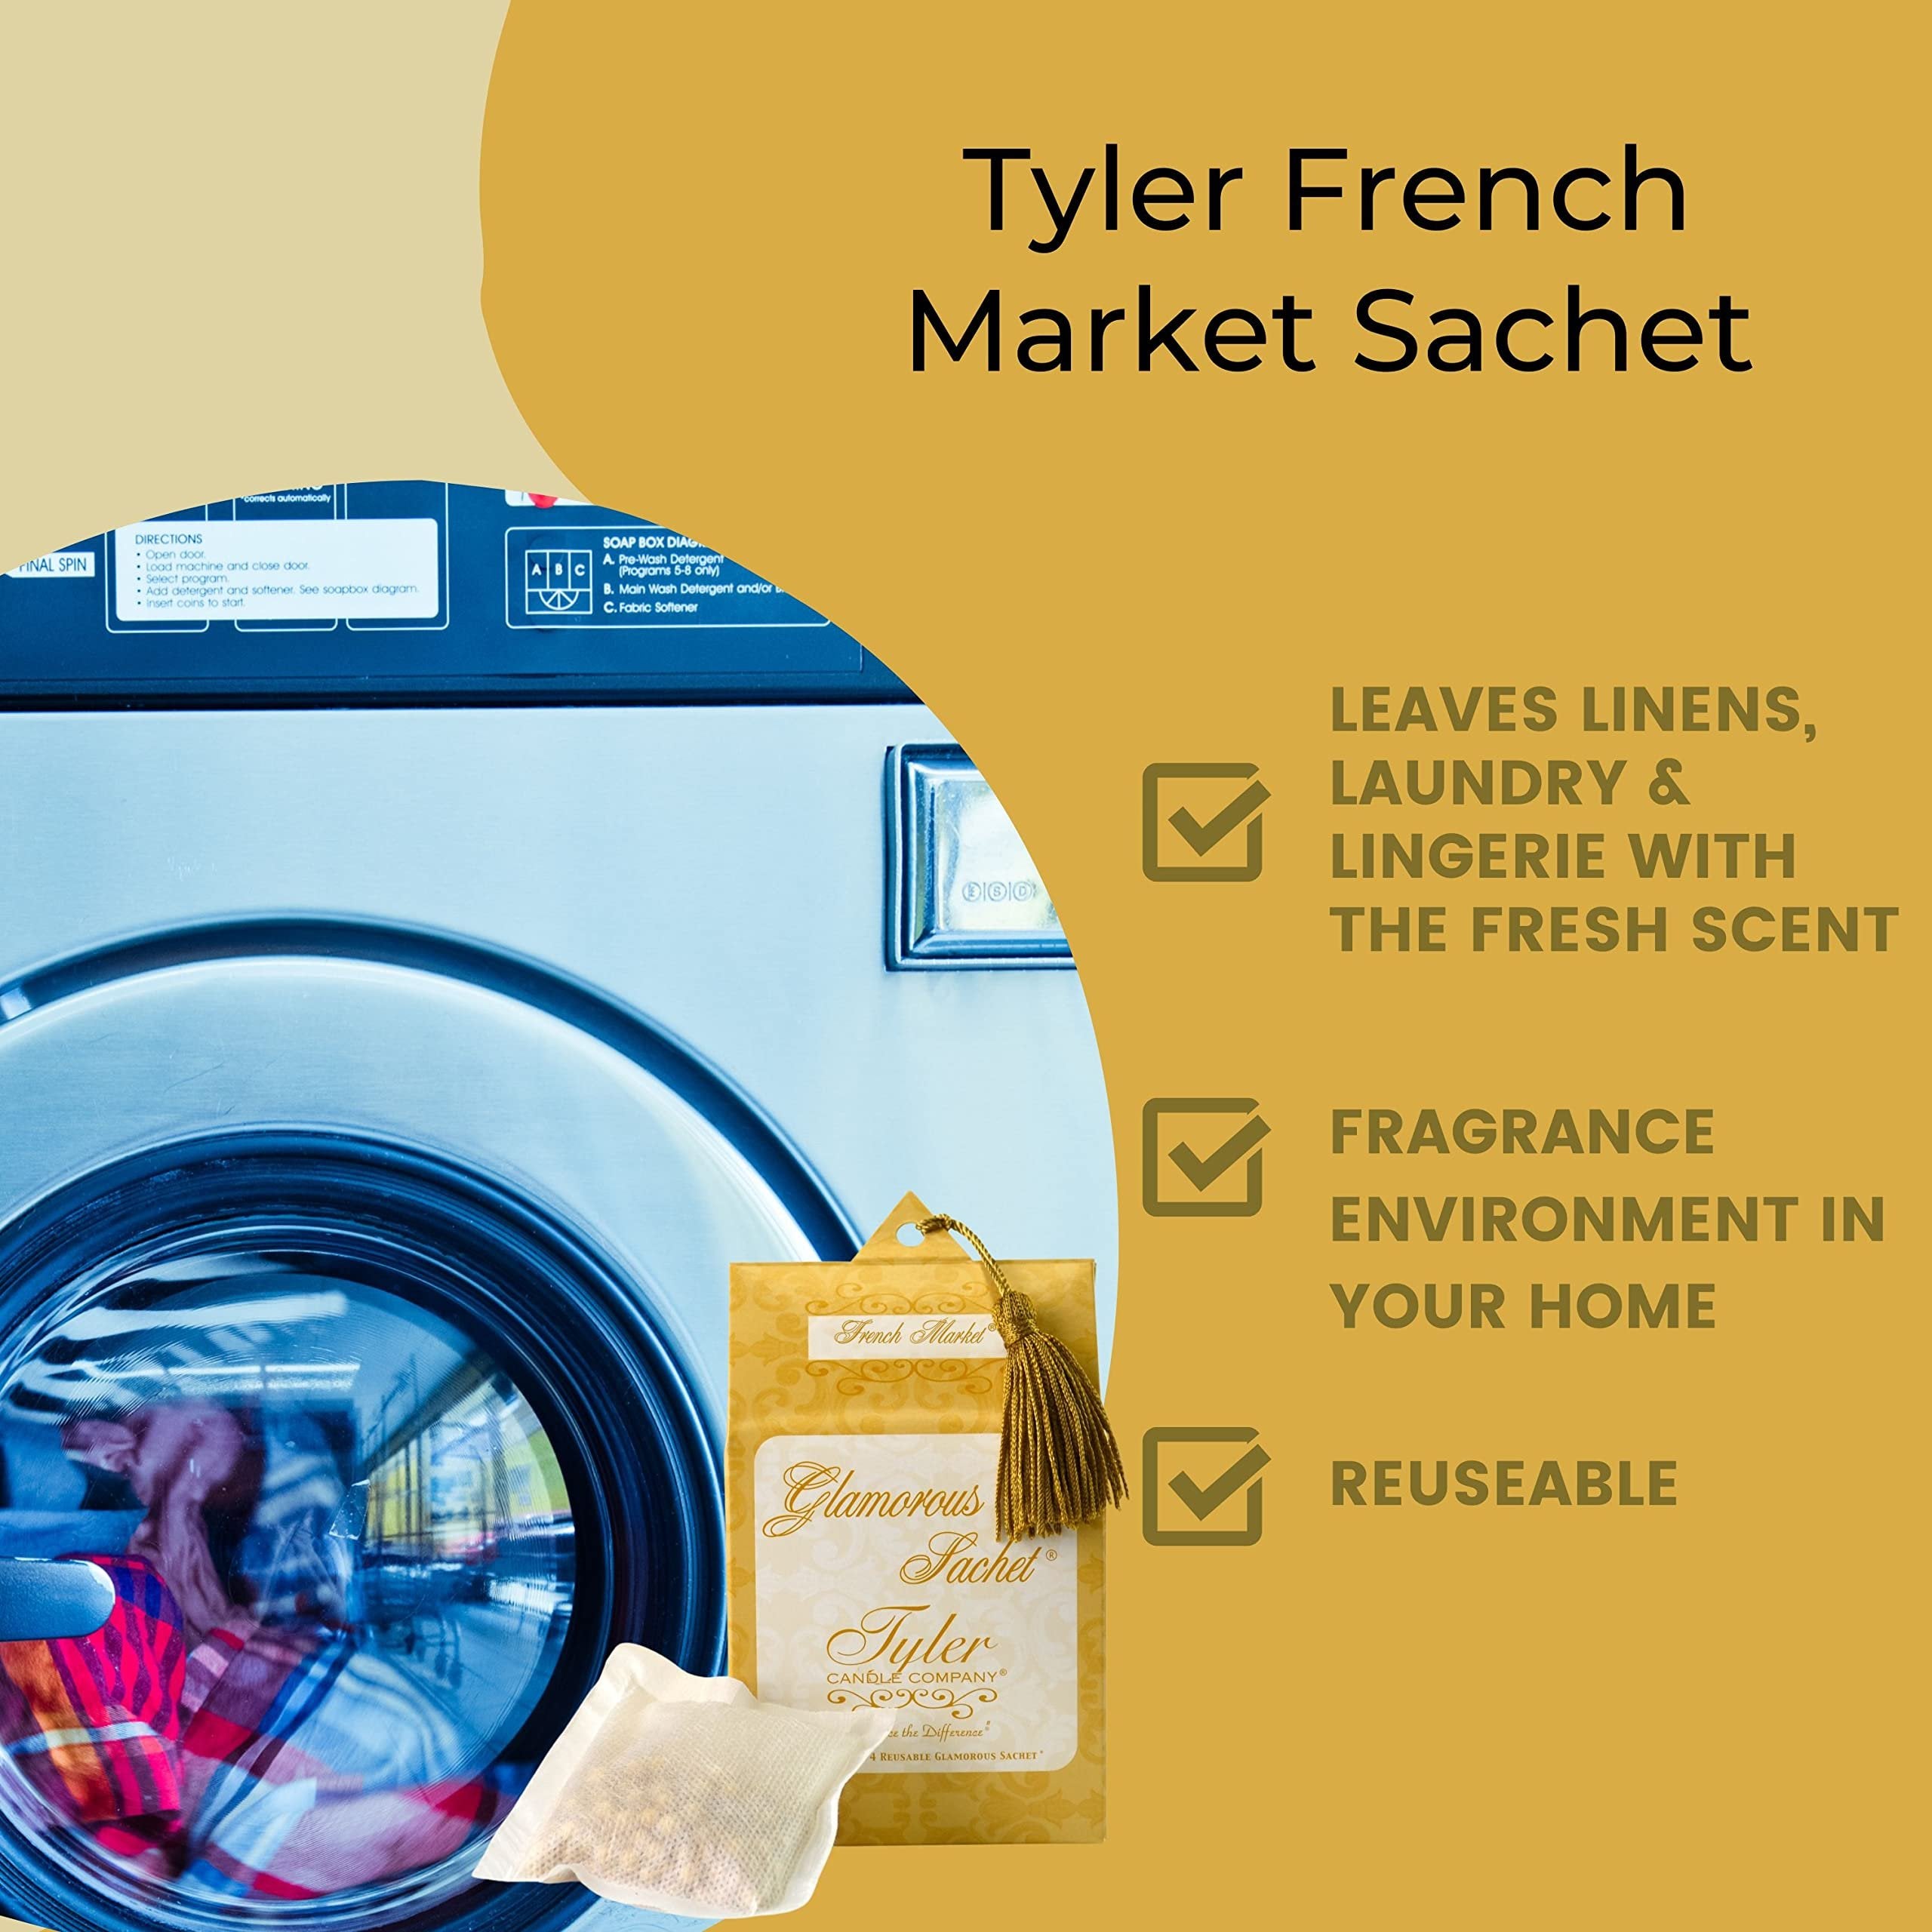 Tyler Candle Company French Market Dryer Sheet Sachets - Glamorous Reusable Dryer Sheets - Sachets for Drawers and Closets - 1 Pack, 4 Sachets, Dryer, Home, or Personal Sachet, with Bonus Key Chain